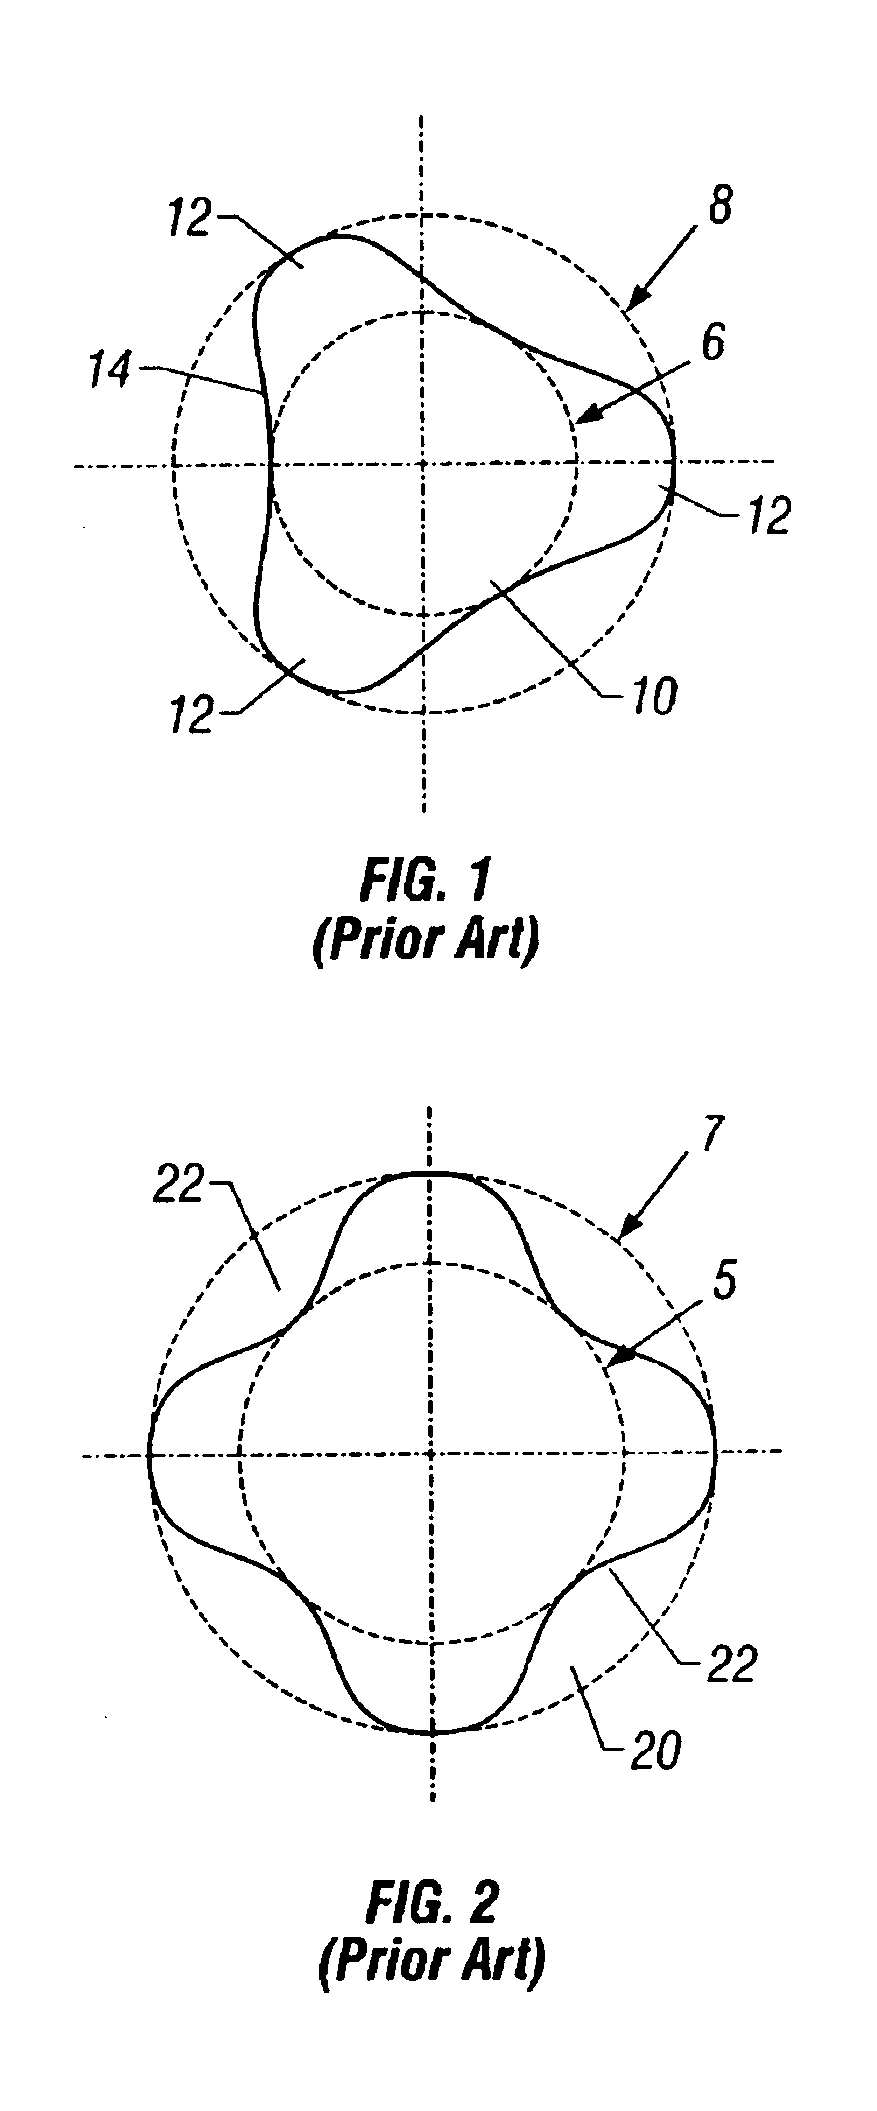 Method of forming an optimized fiber reinforced liner on a rotor with a motor